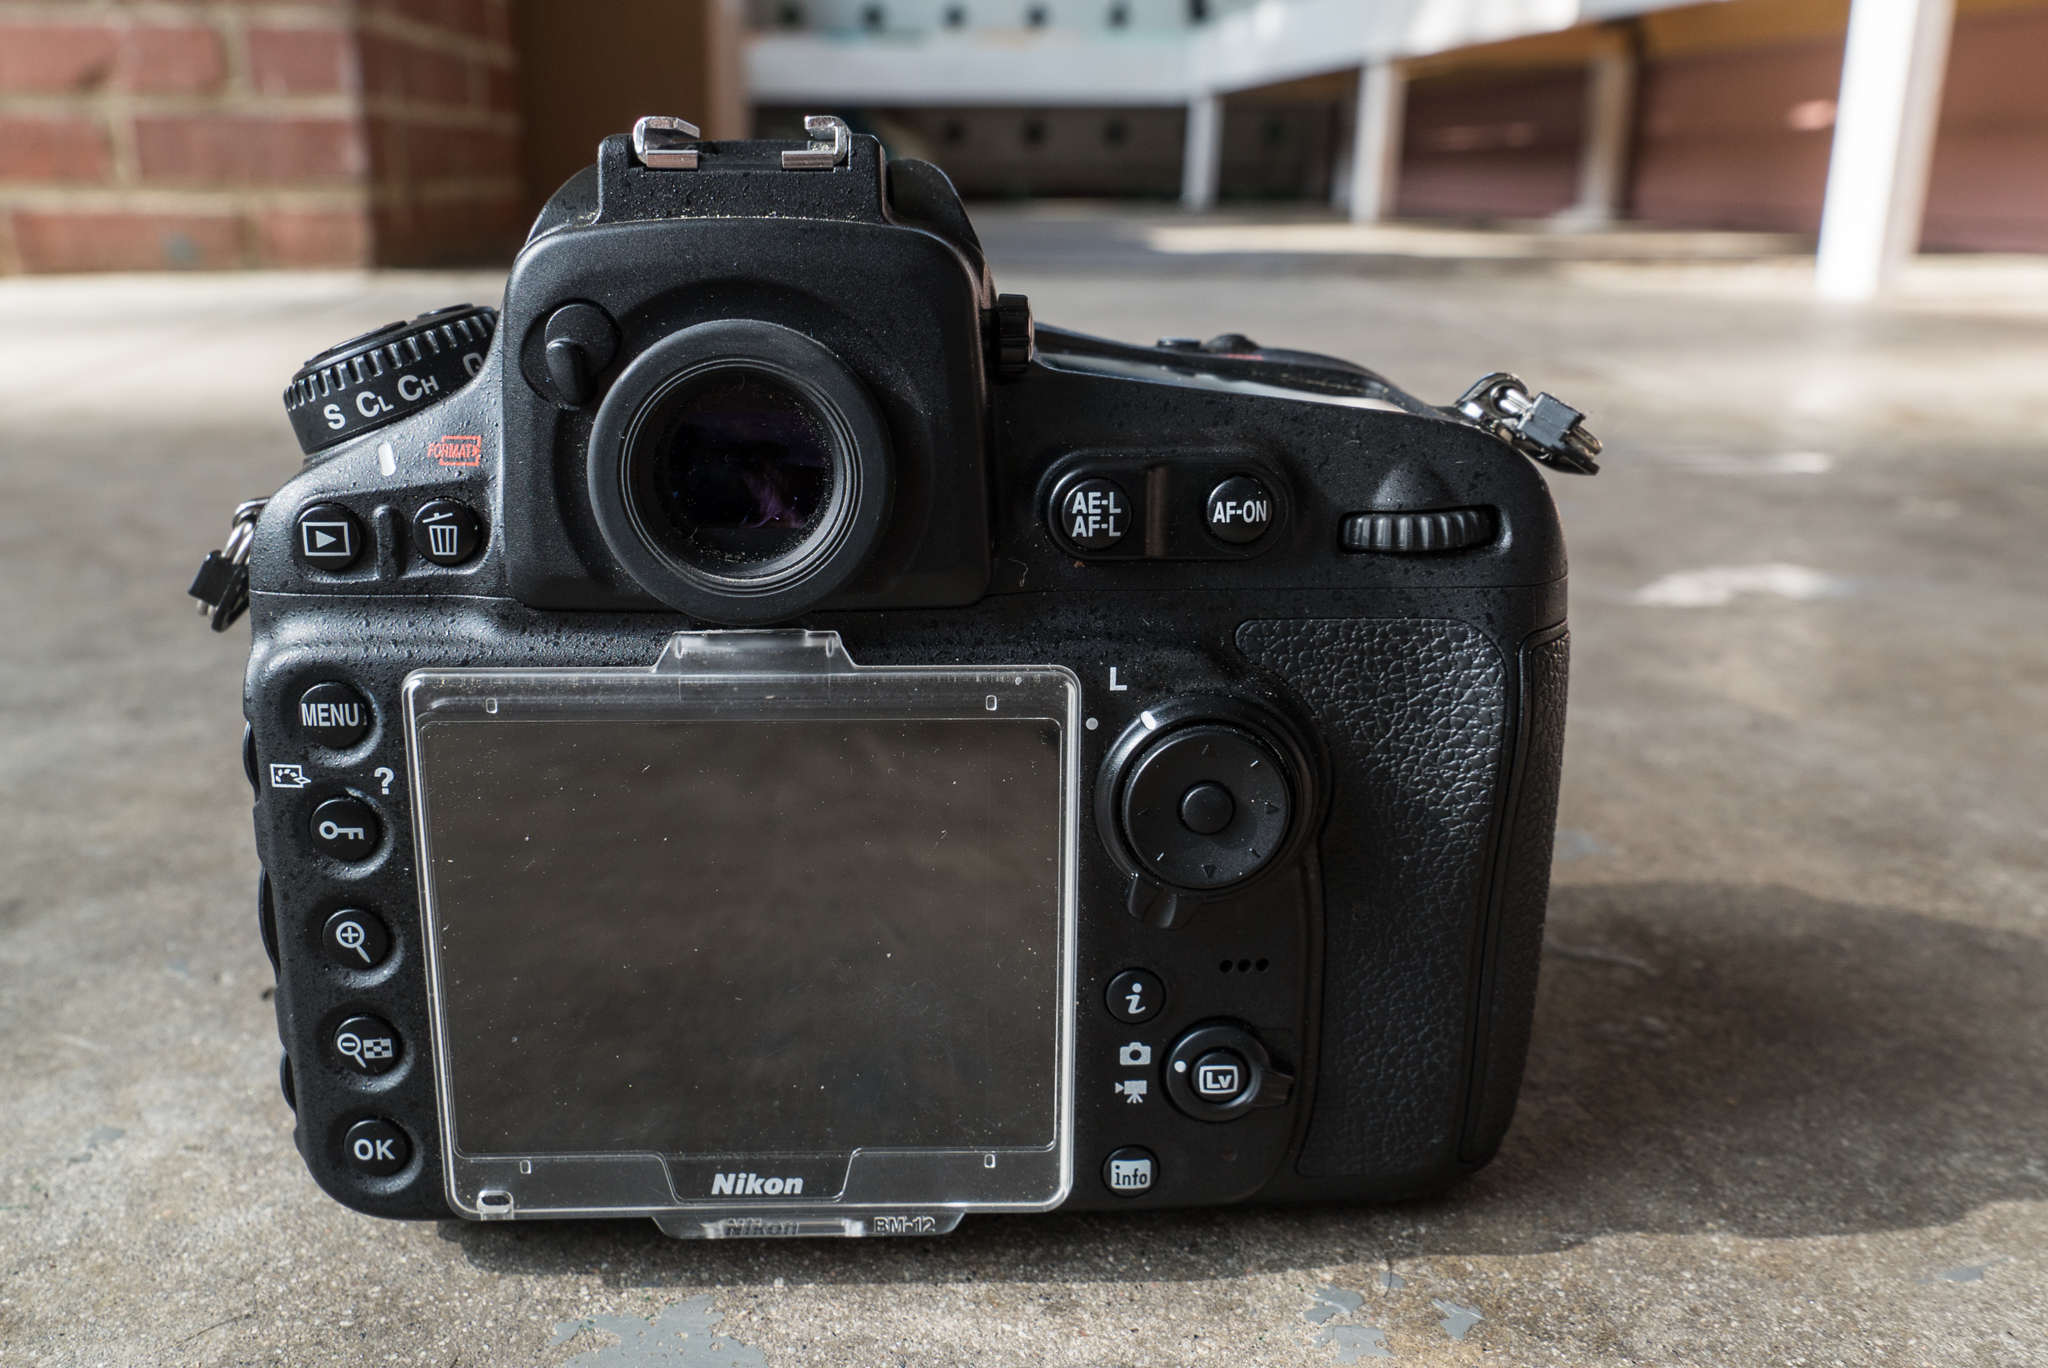 Nikon D810 Review: The Ultimate Adventure Camera?